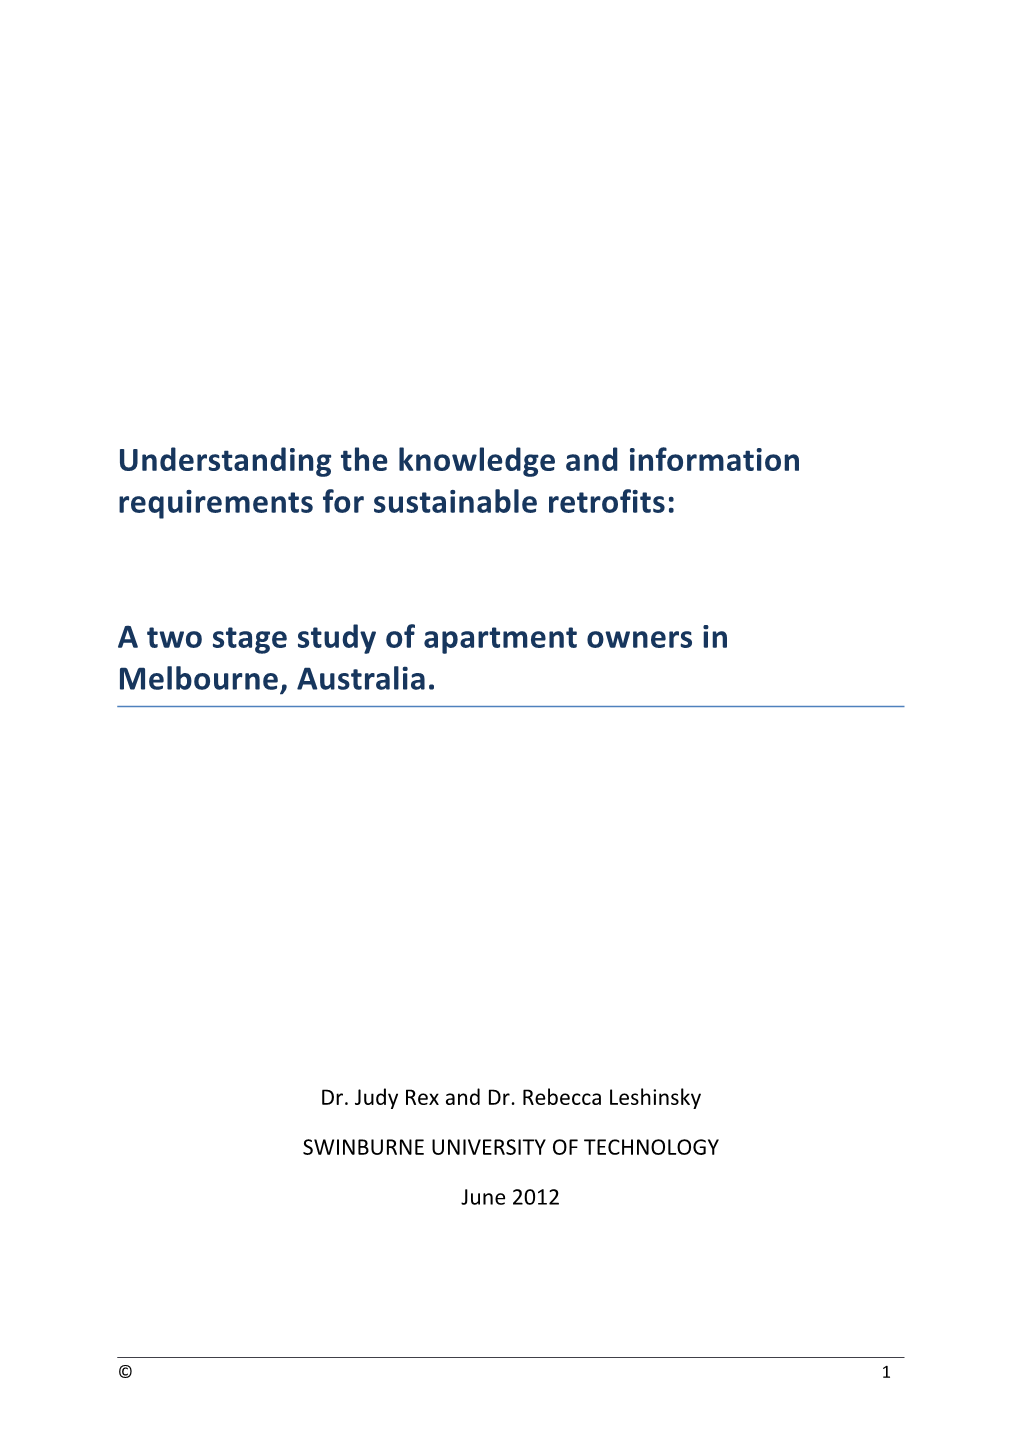 Understanding the Knowledge and Information Requirements for Sustainable Retrofits: a Two